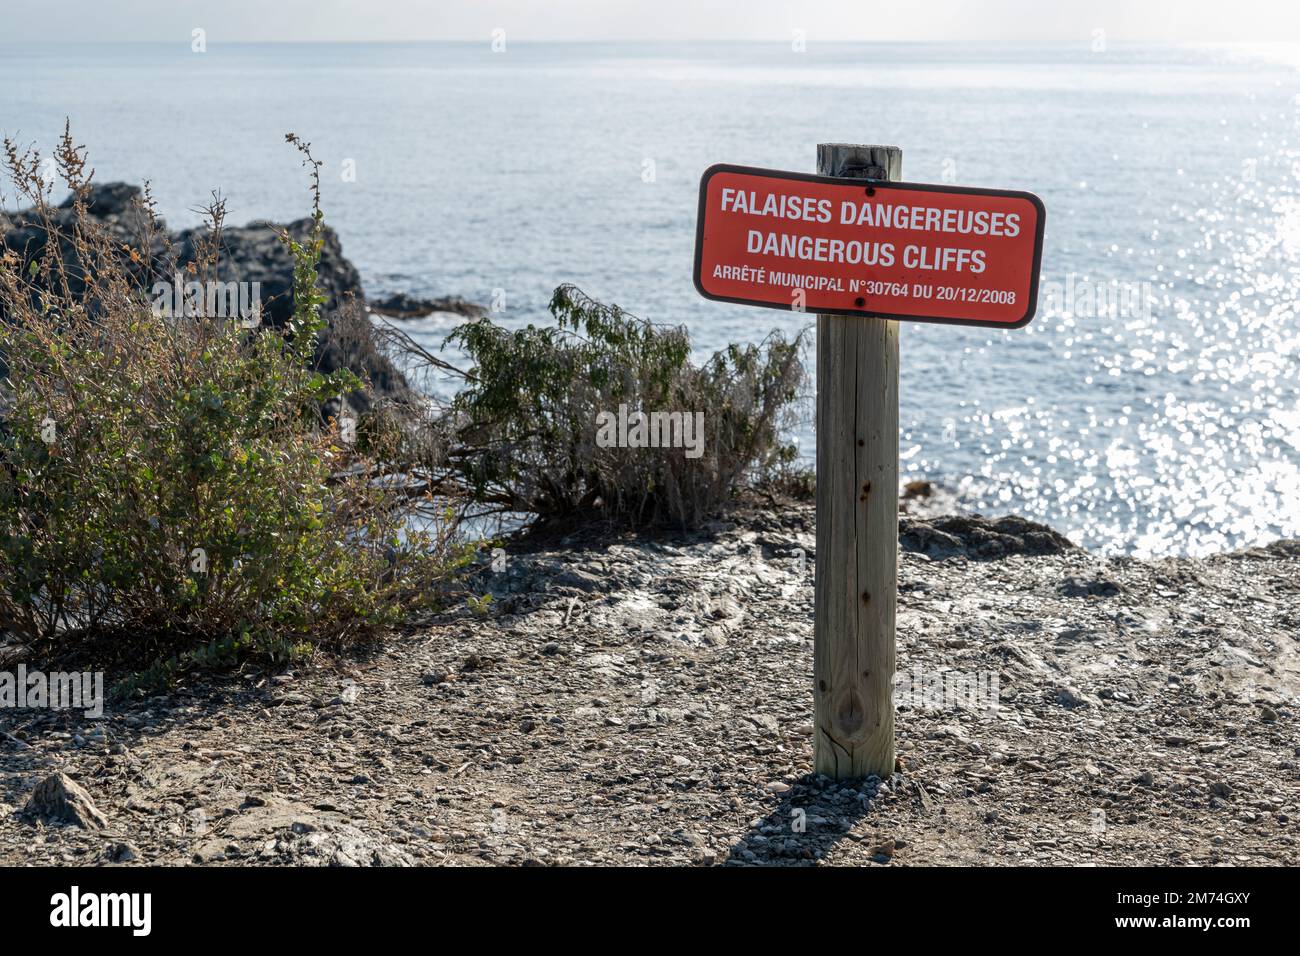 Red warning and information sign in South of France in front of cliffs and bilingual letters french english indicating Dangerous cliffs Stock Photo